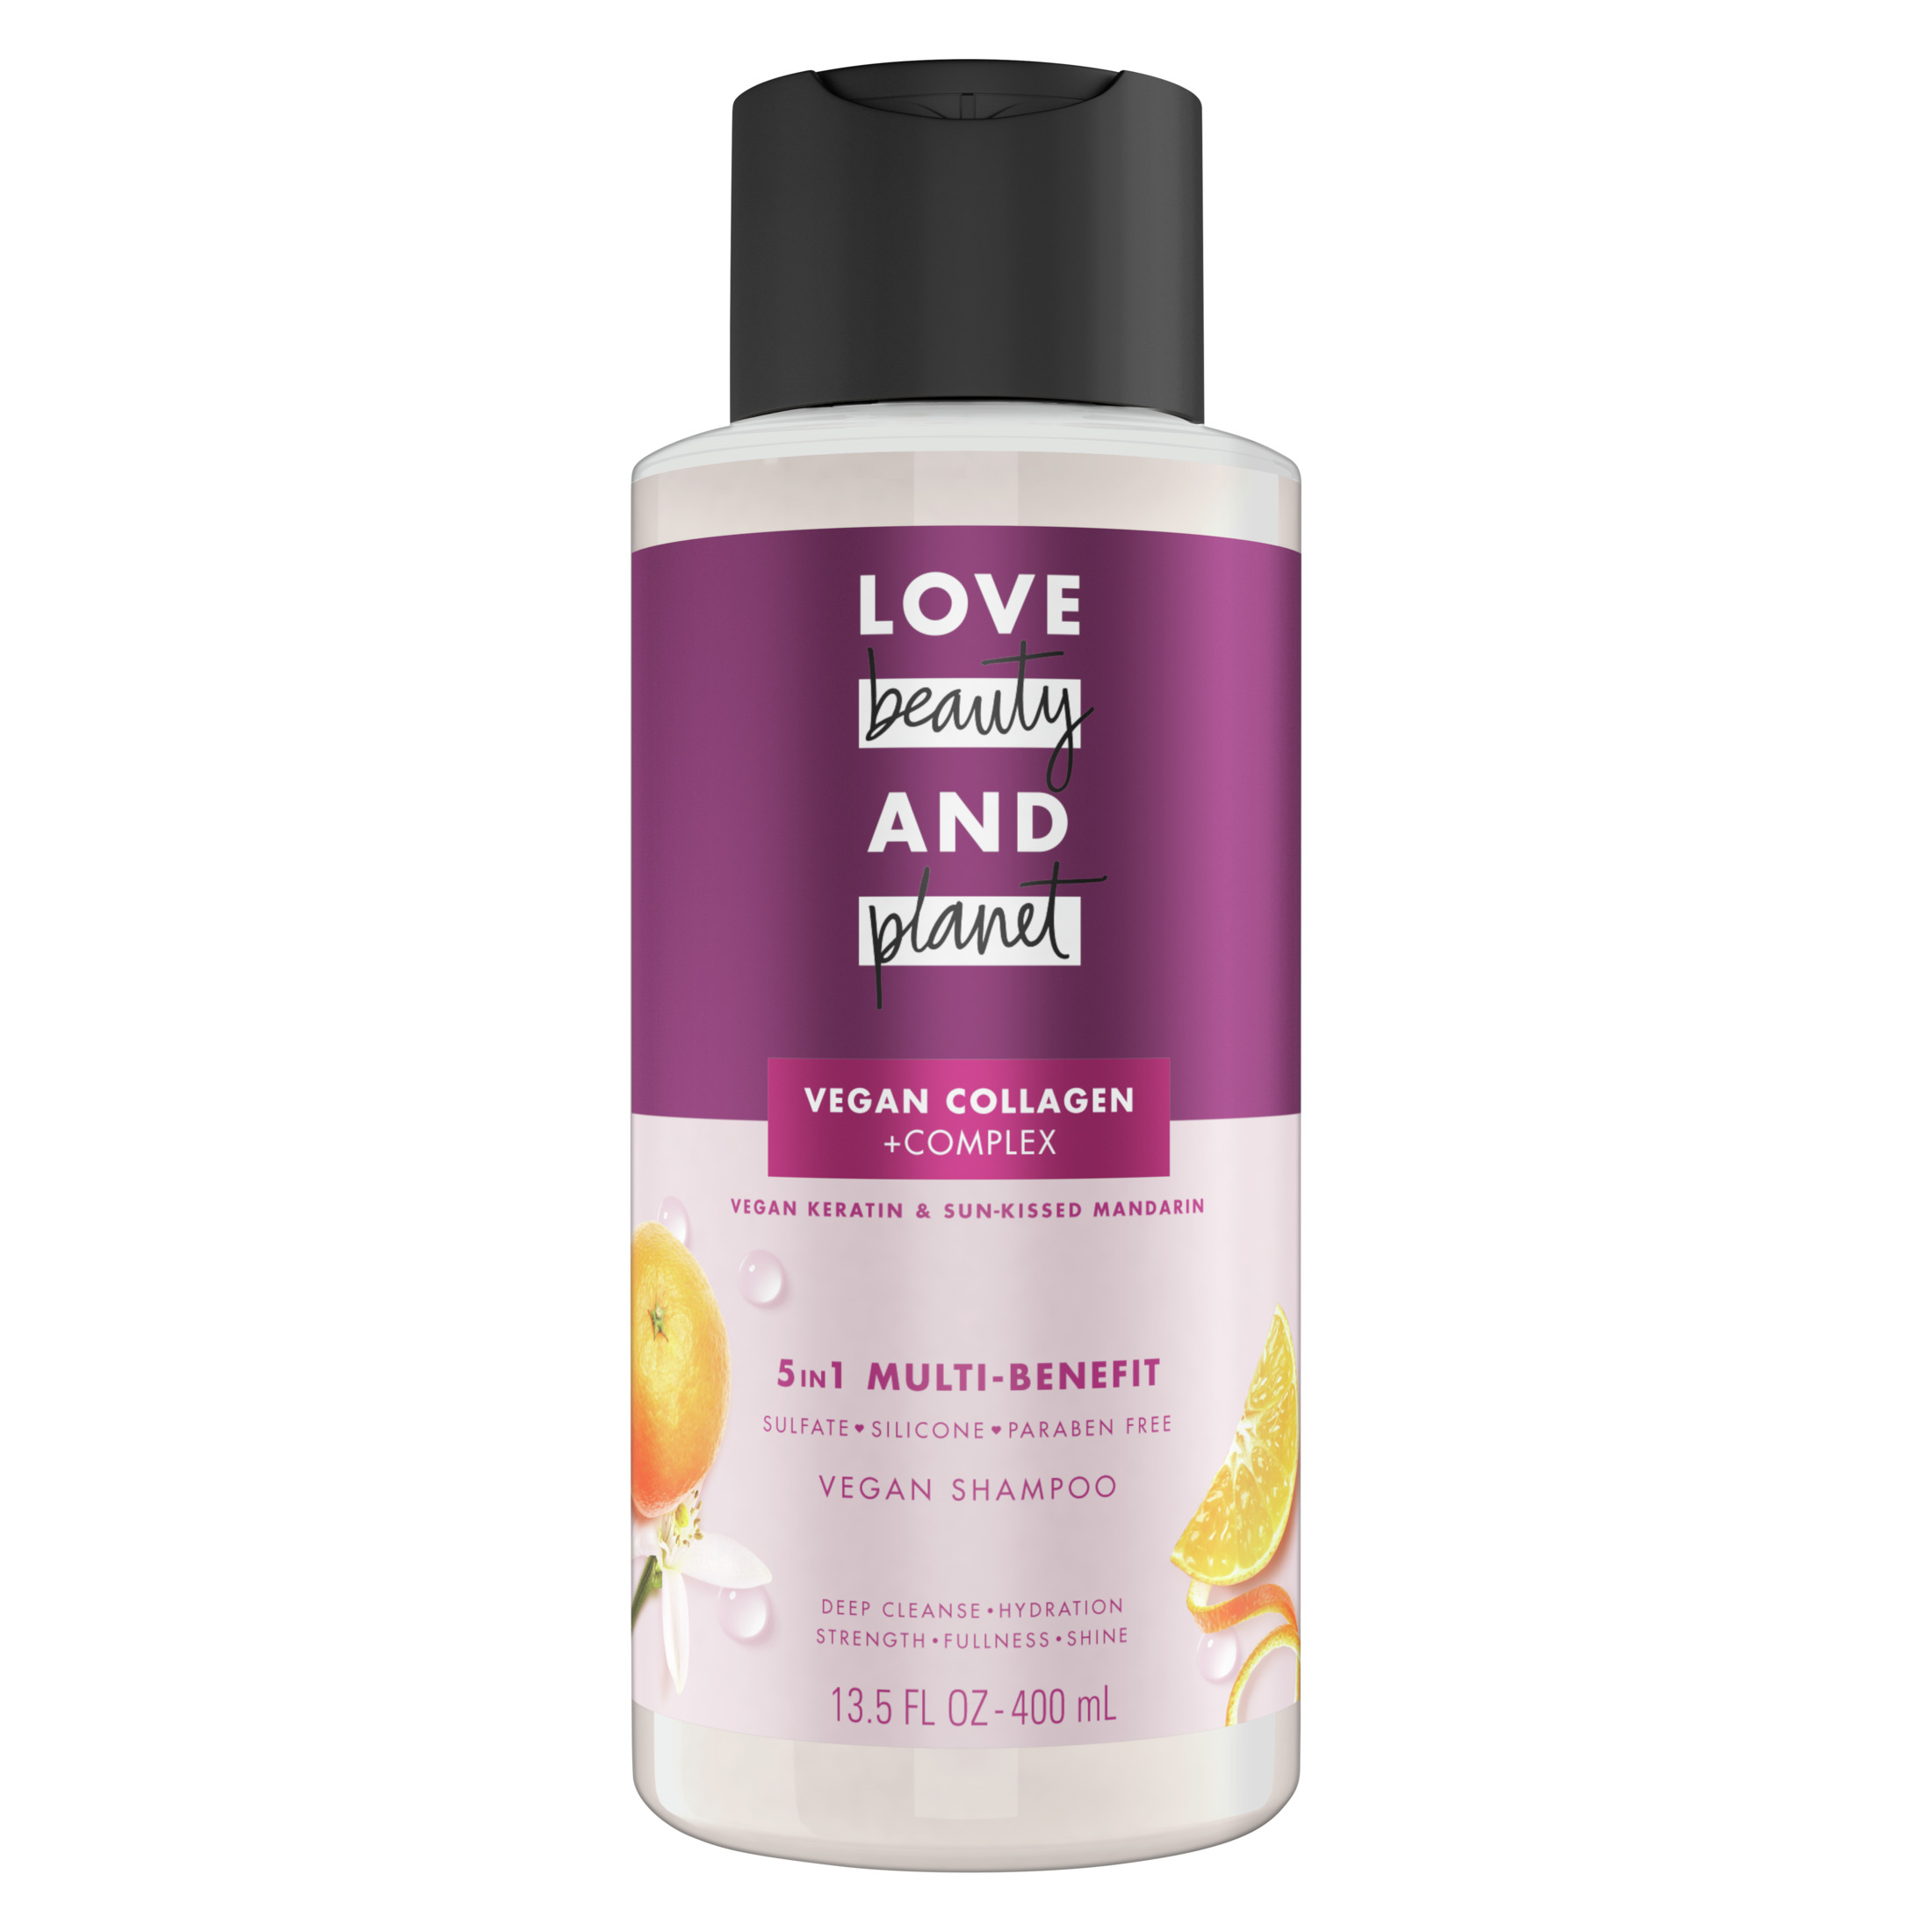 Love Beauty and Planet Nourishing Daily Shampoo for All Hair Types, Sun-Kissed Mandarin, 13.5 fl oz - image 1 of 11